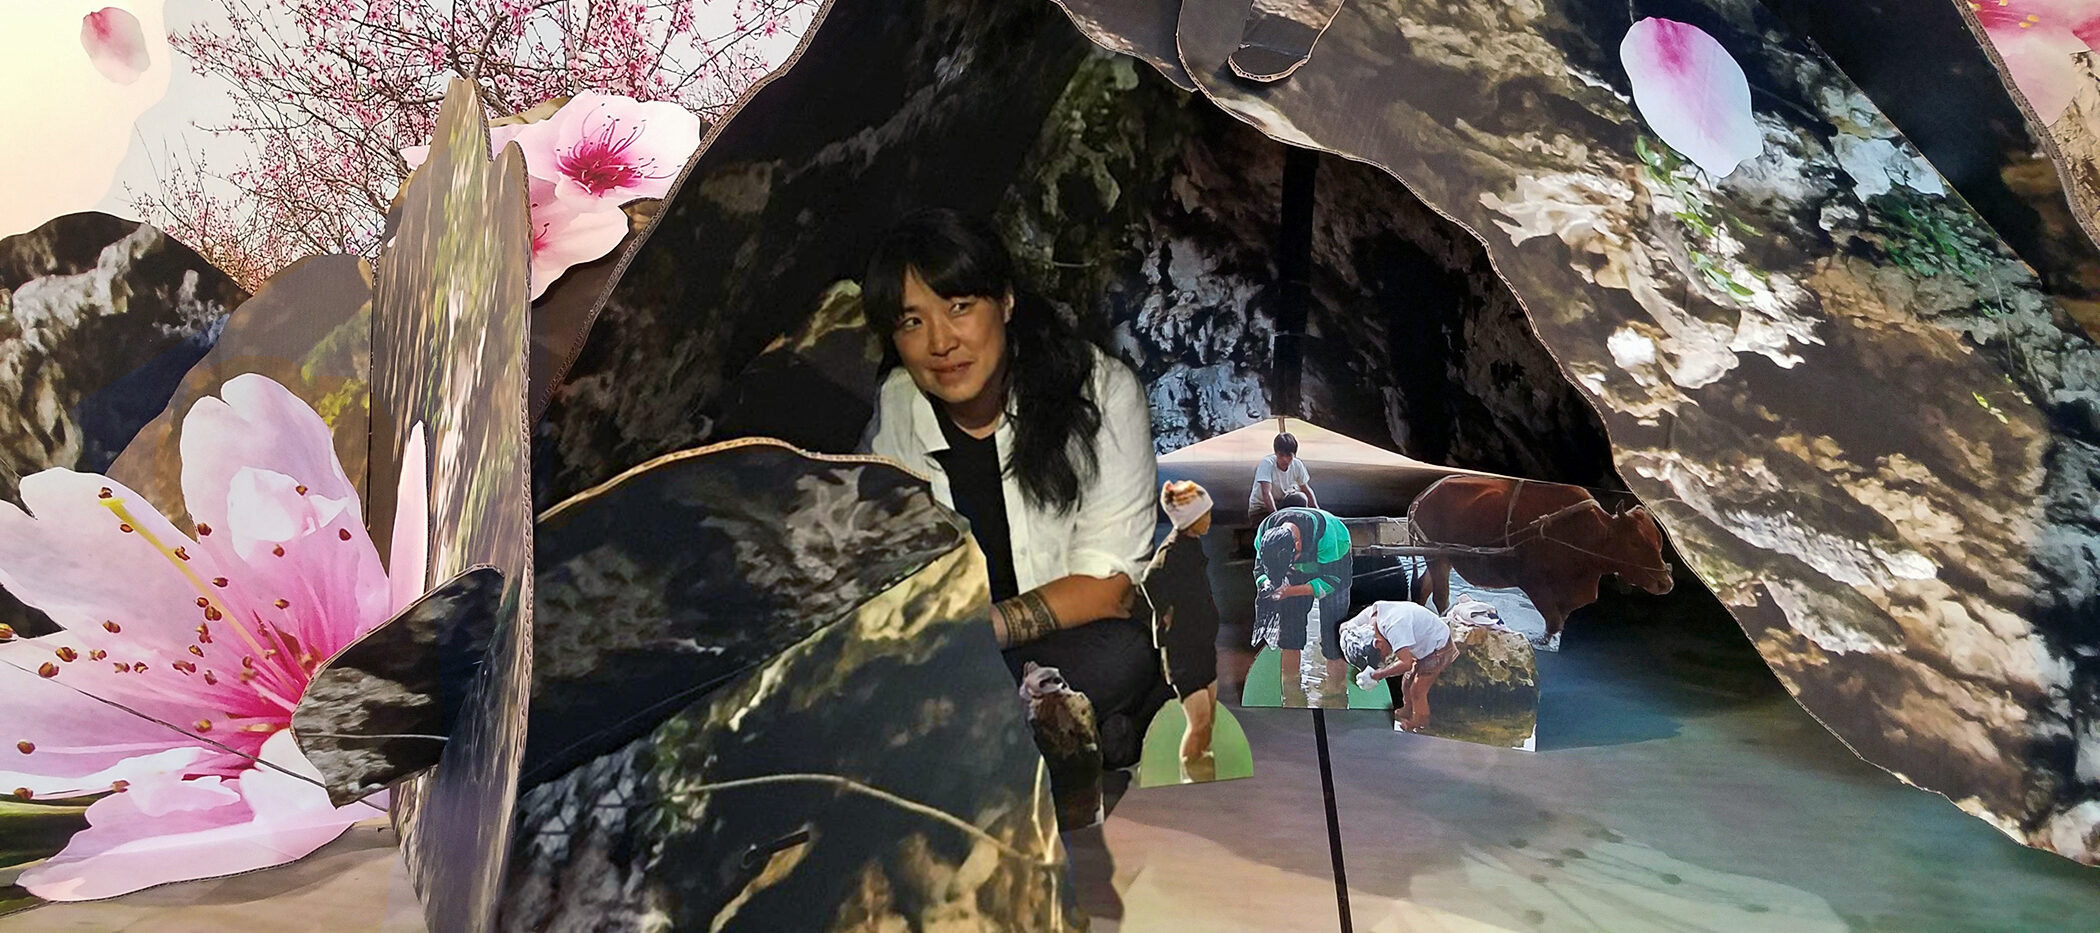 A three-dimensional photo collage of natural images creating a dome over images of five figures. The central figure is a light-skinned woman with long dark hair in a crouched position.